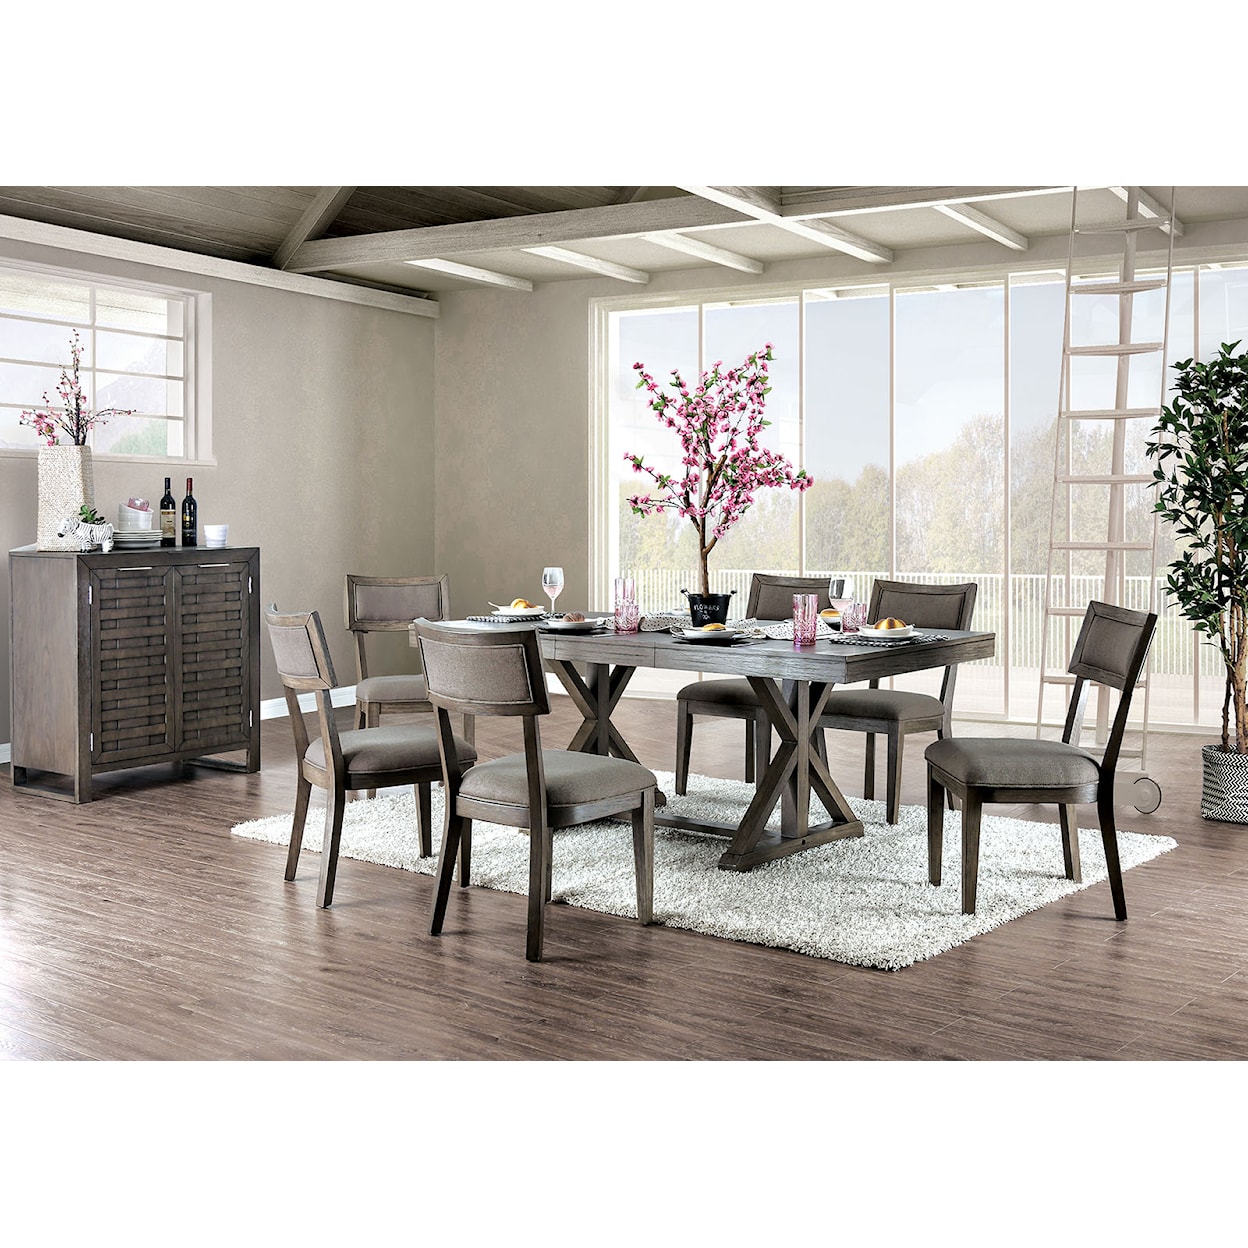 Furniture of America Leeds Dining Table